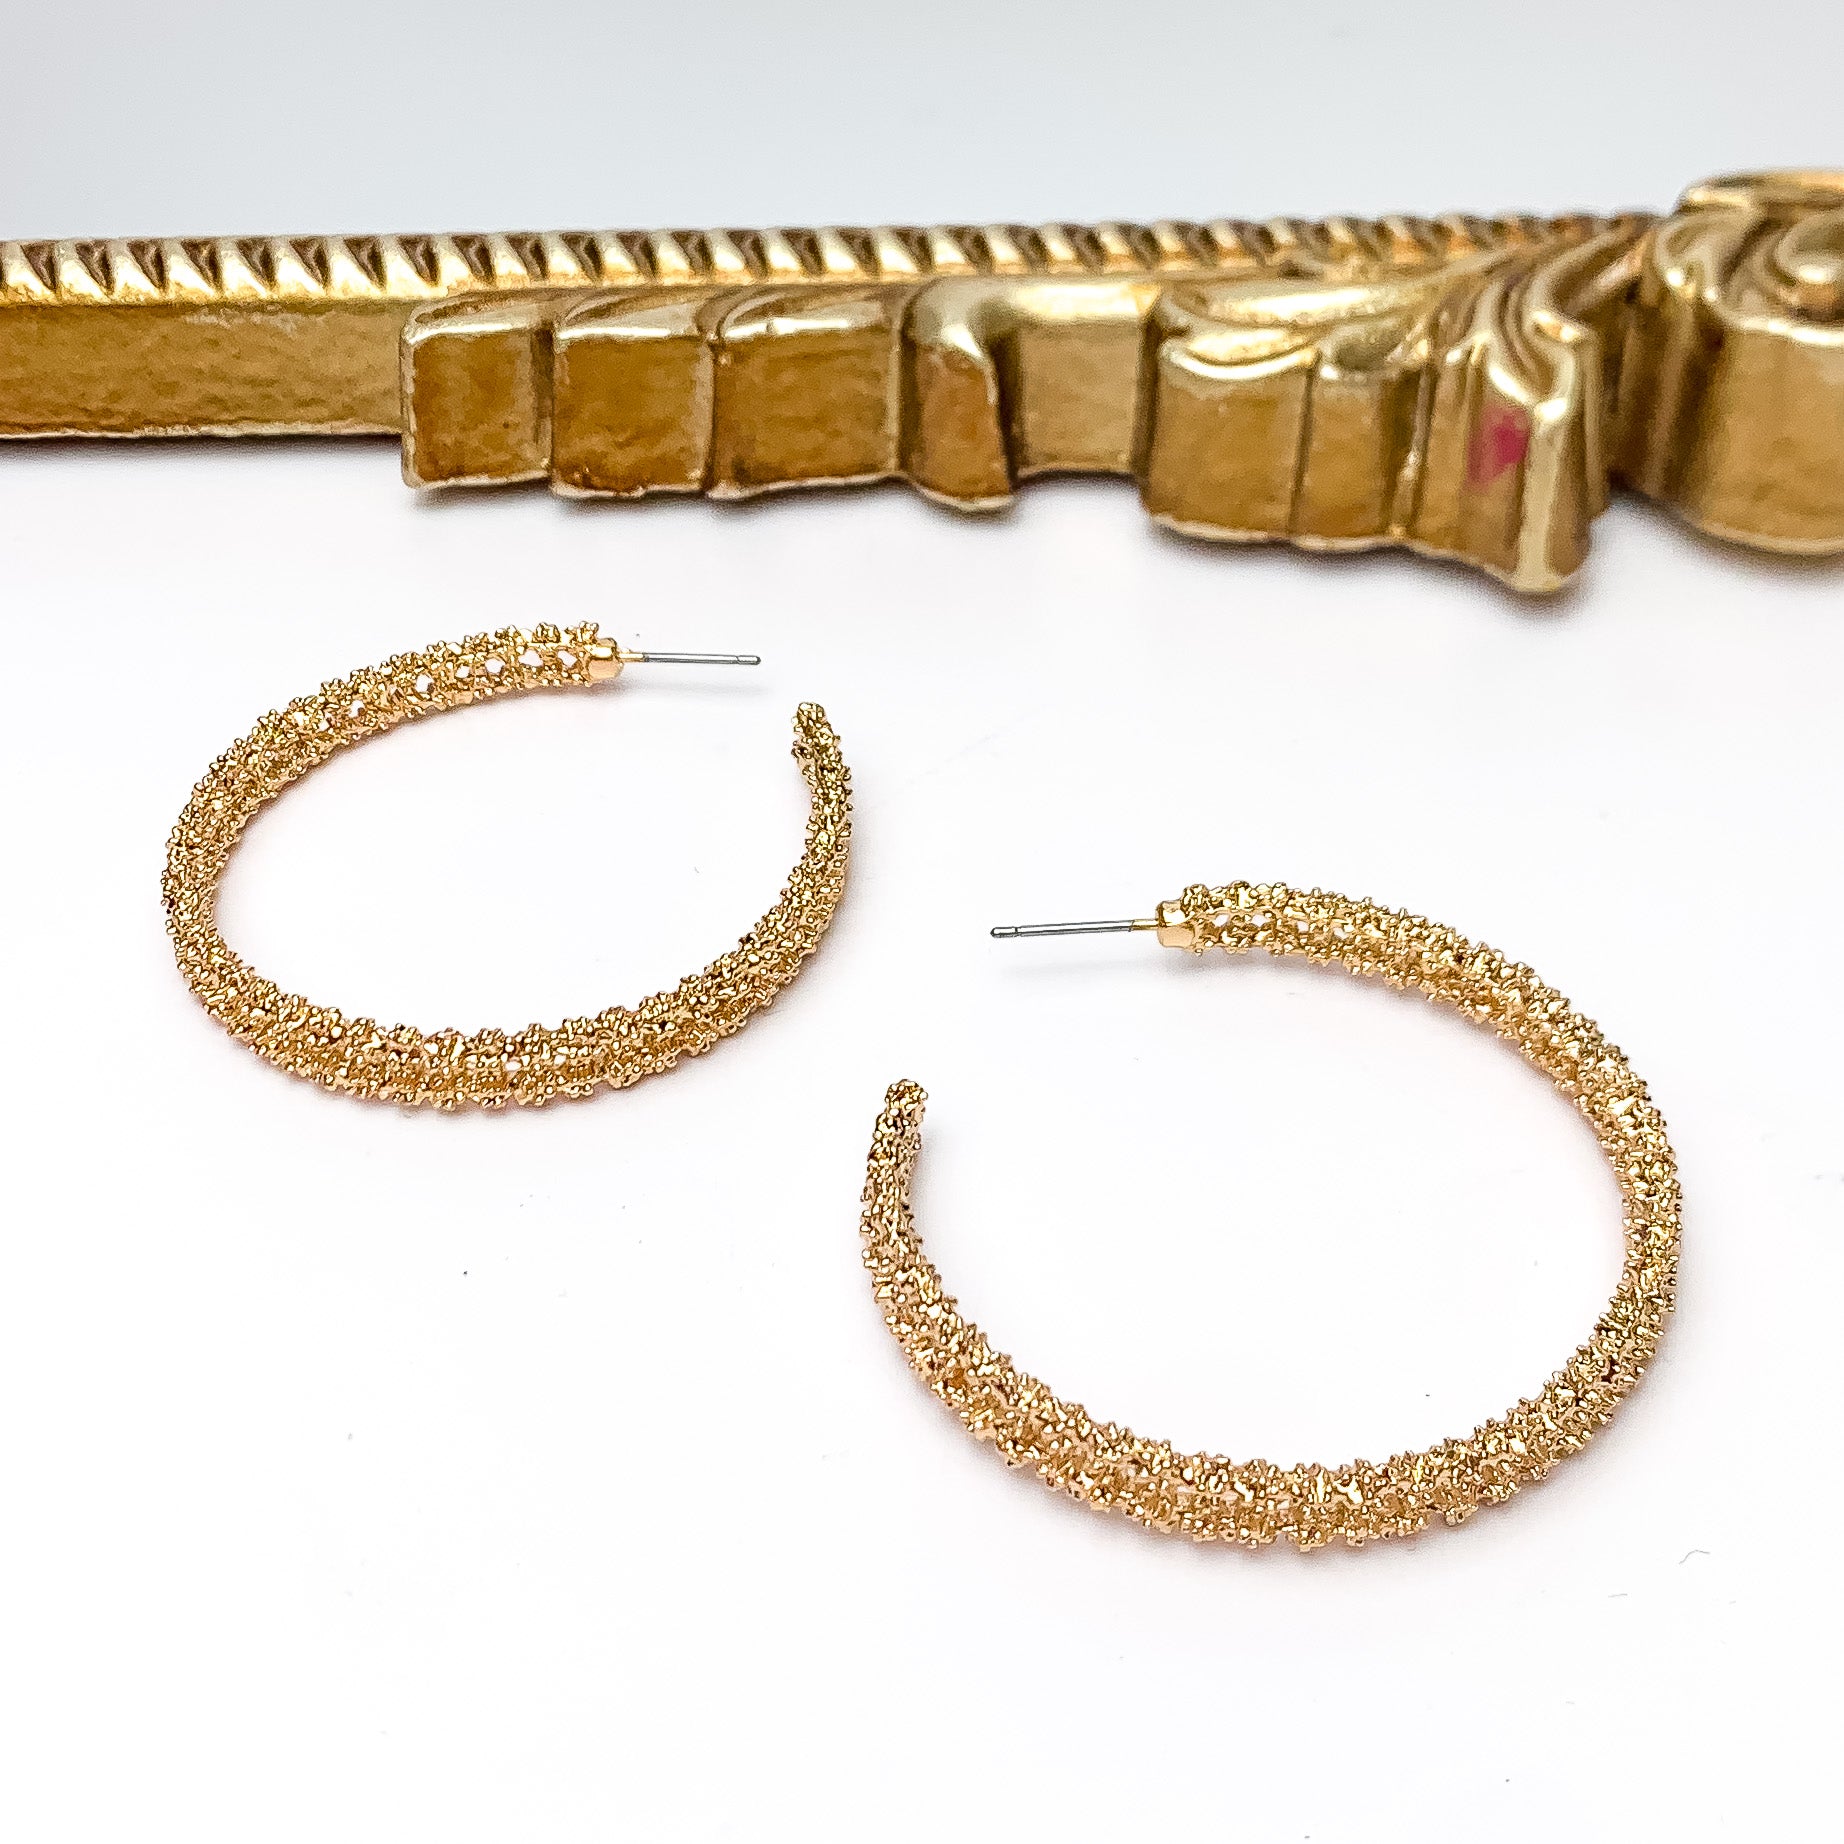 Worry Free Large Gold Tone Textured Hoop Earrings. Pictured on a white background with a gold frame above the earrings.